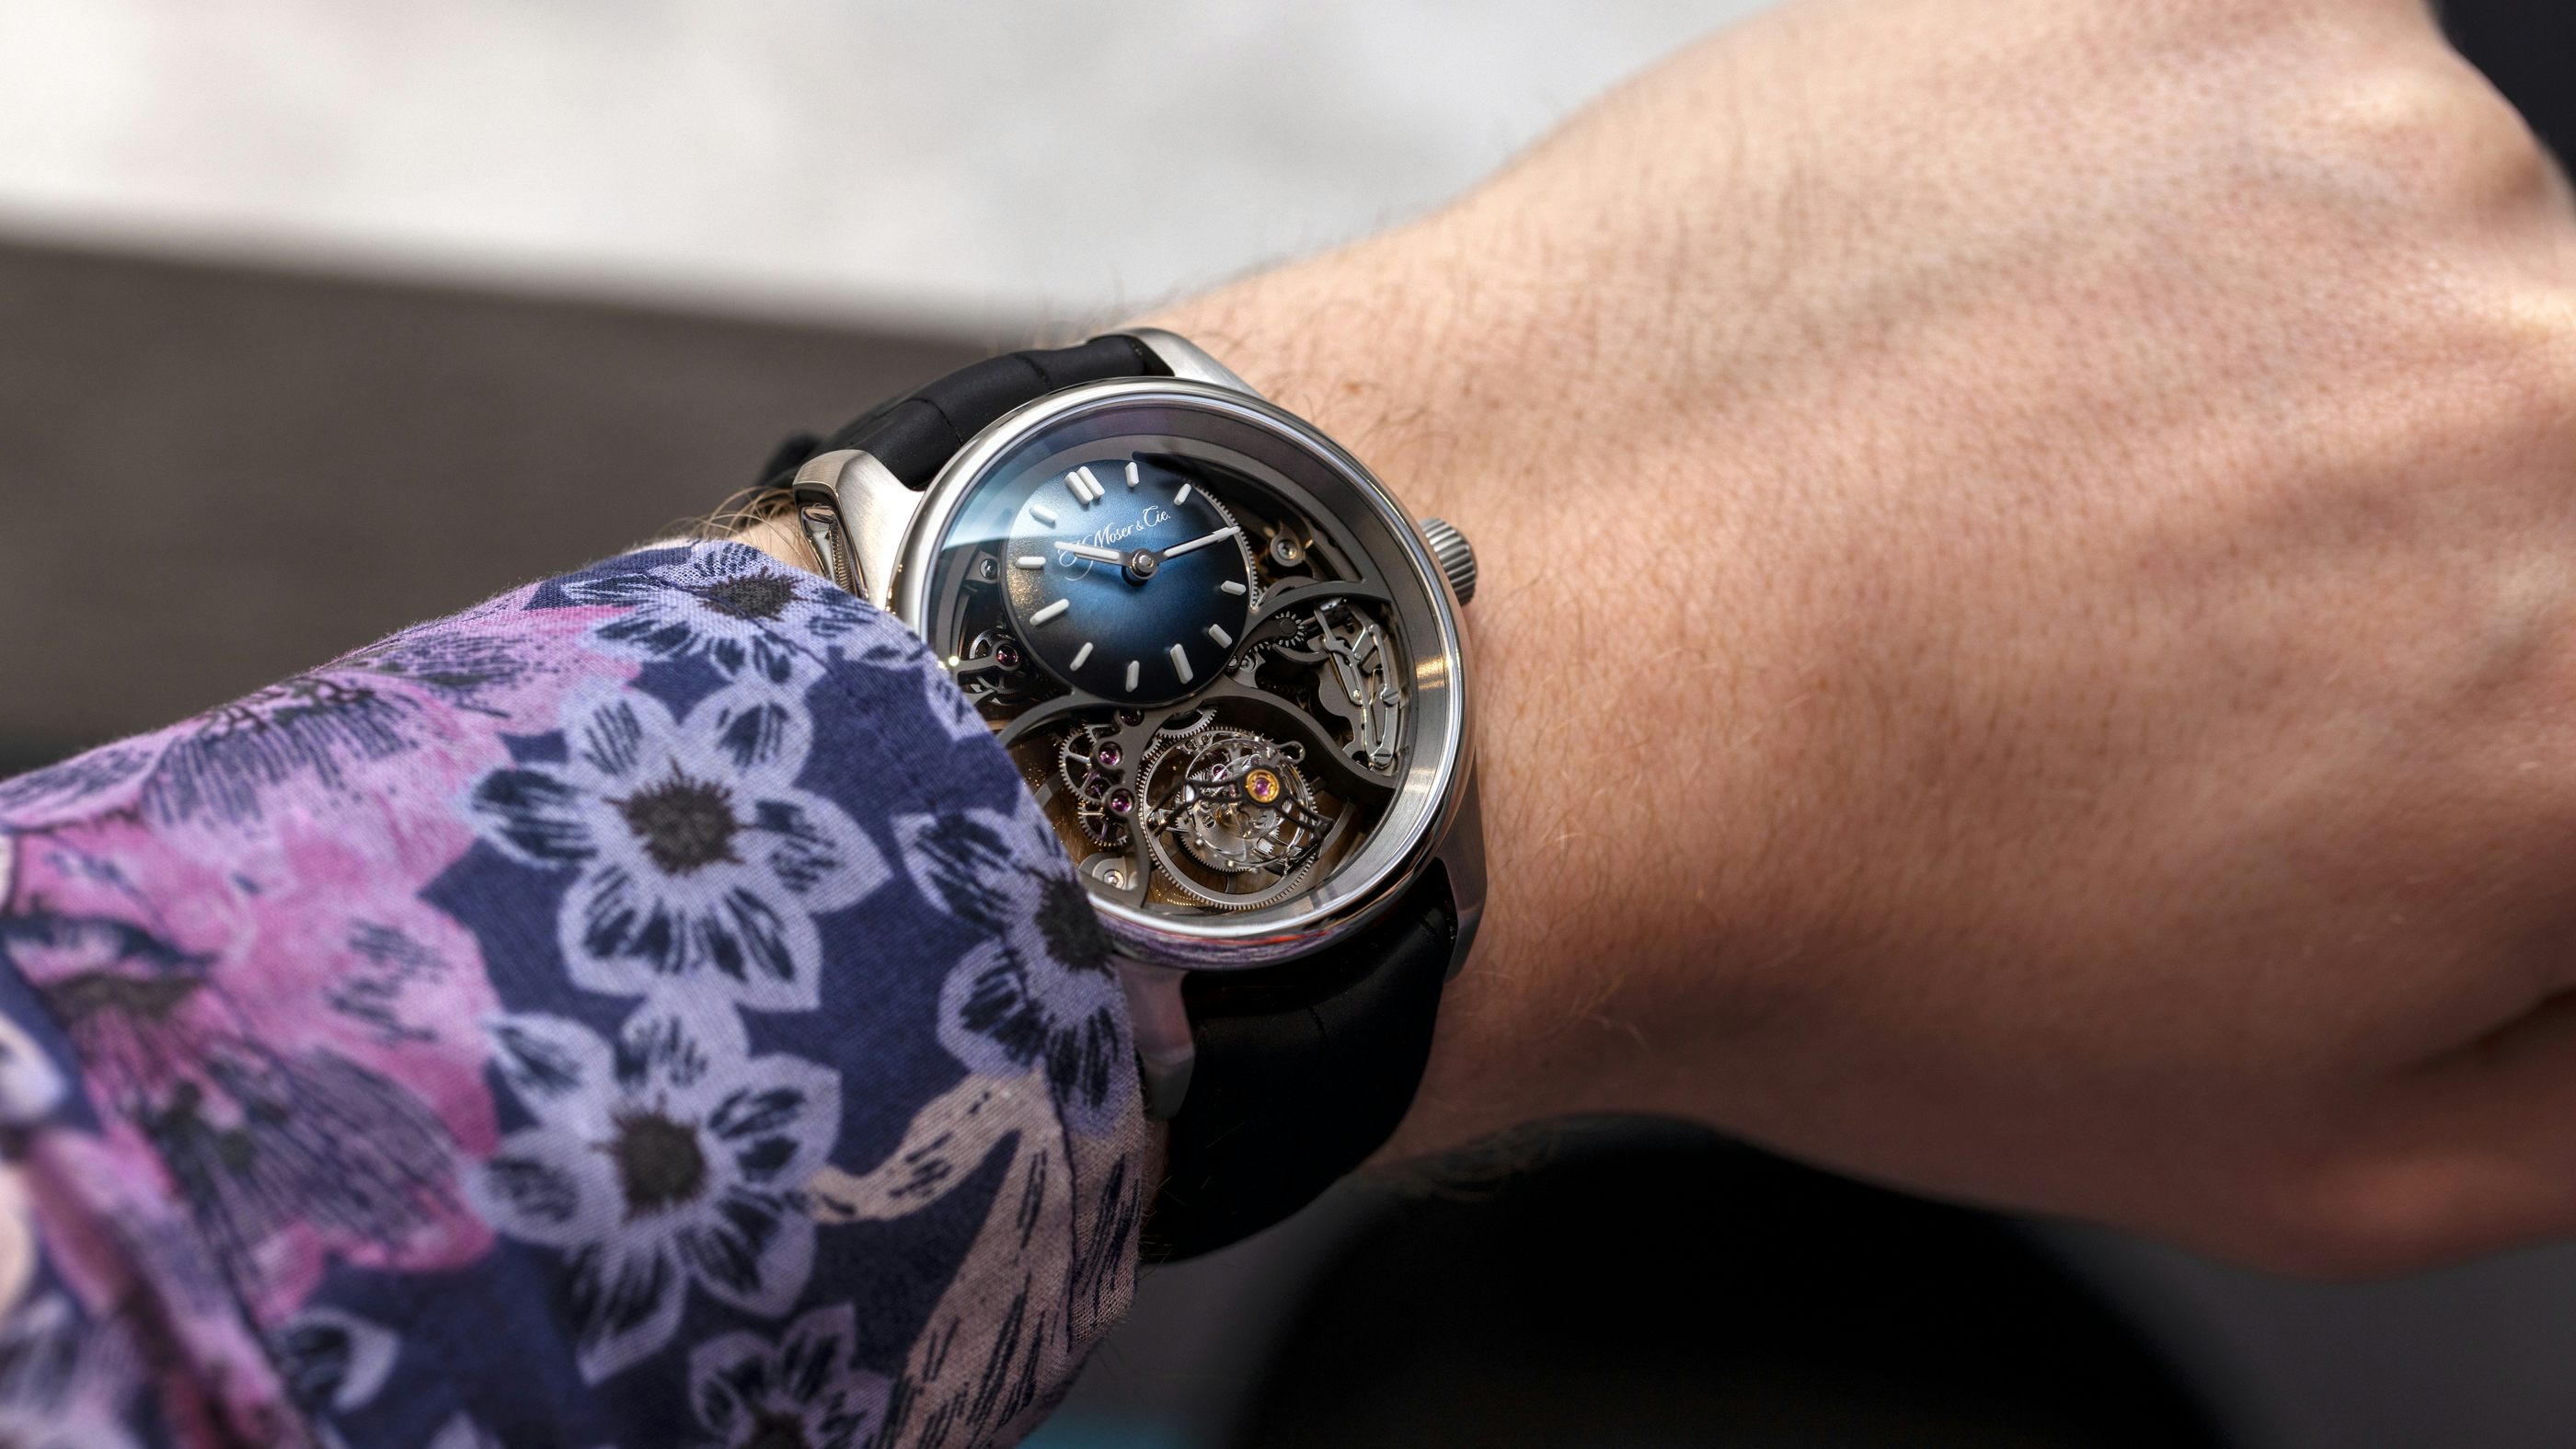 A Hands-On Review Of The H. Moser Cylindrical Tourbillon